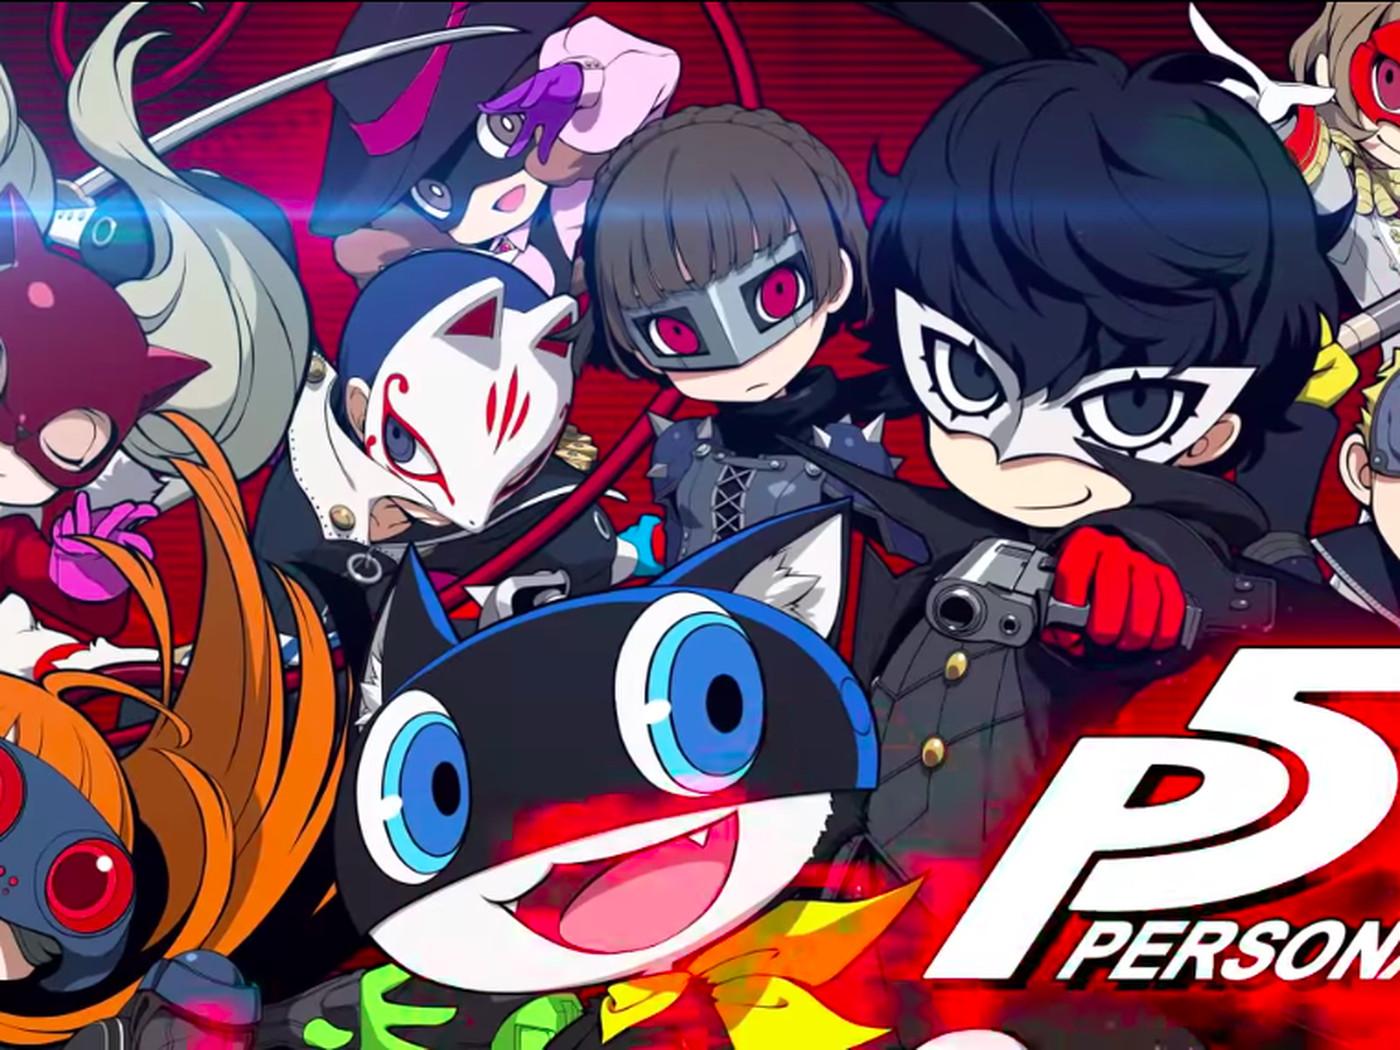 Persona Q2: Cinema Labyrinth launches in Japan this fall